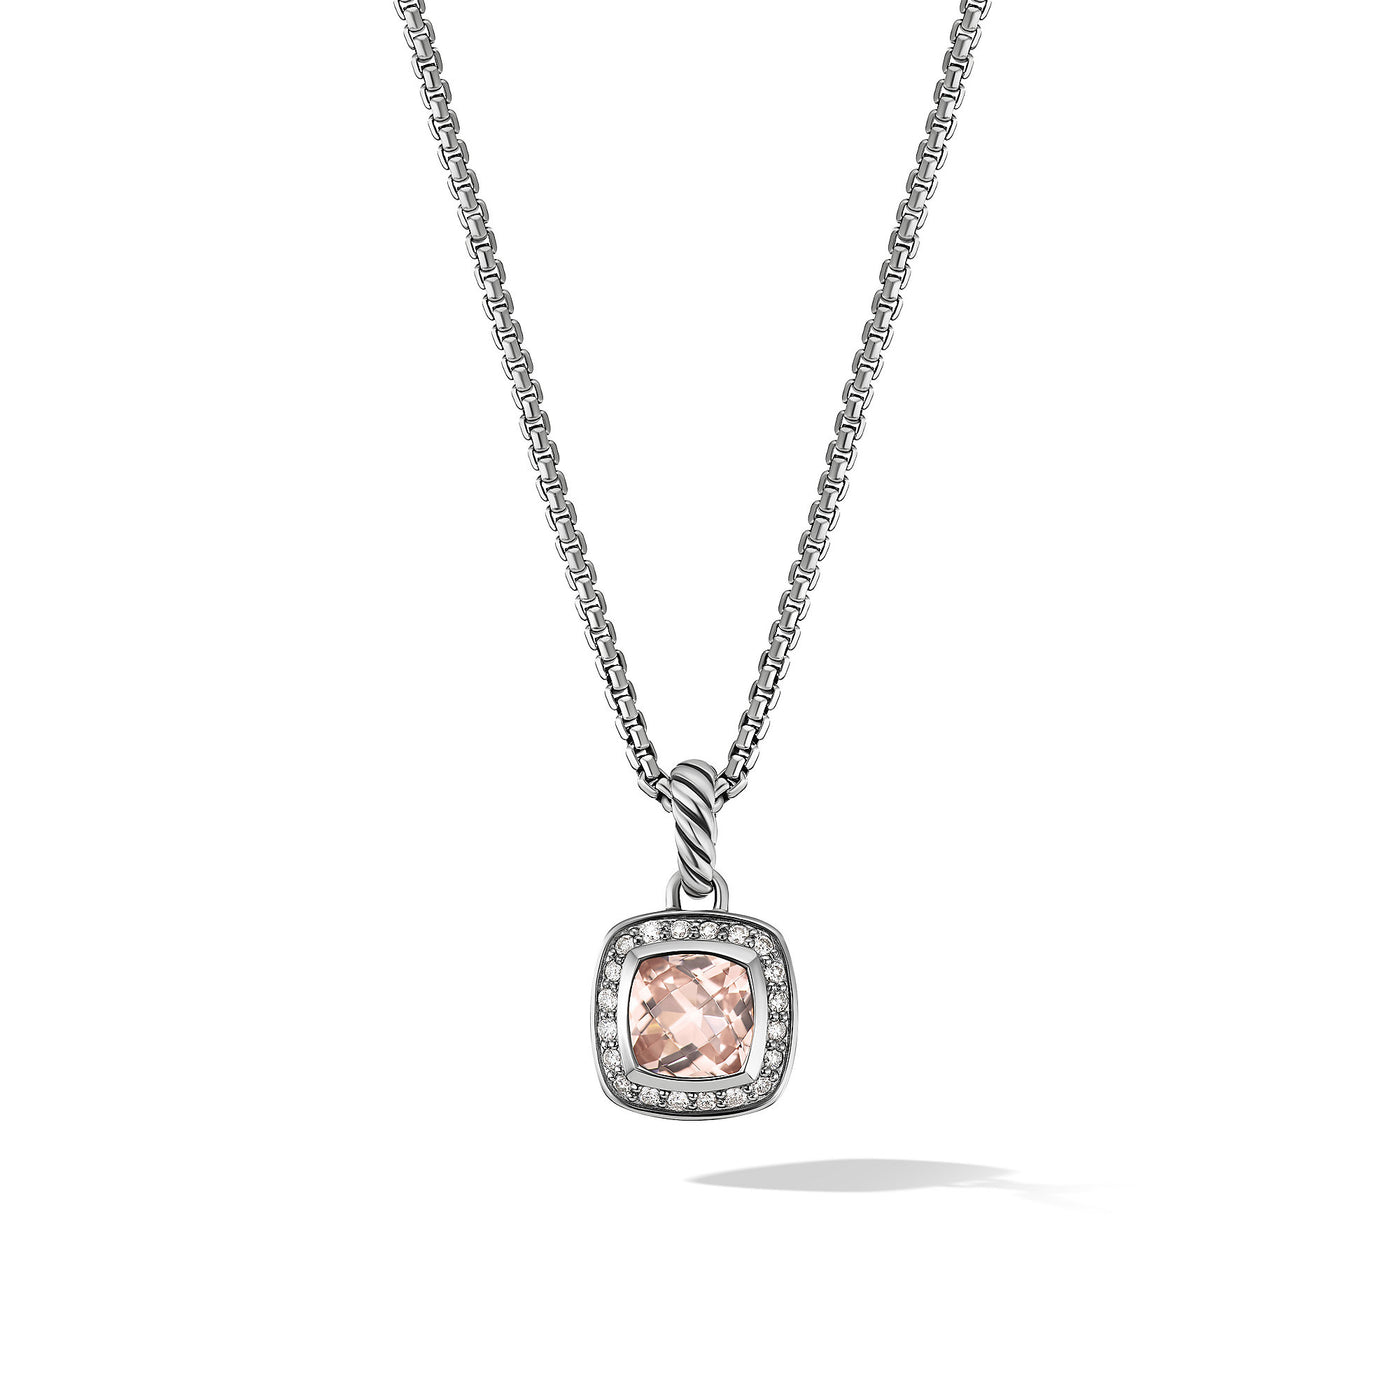 Petite Albion® Pendant Necklace in Sterling Silver with Morganite and Diamonds\, 7mm